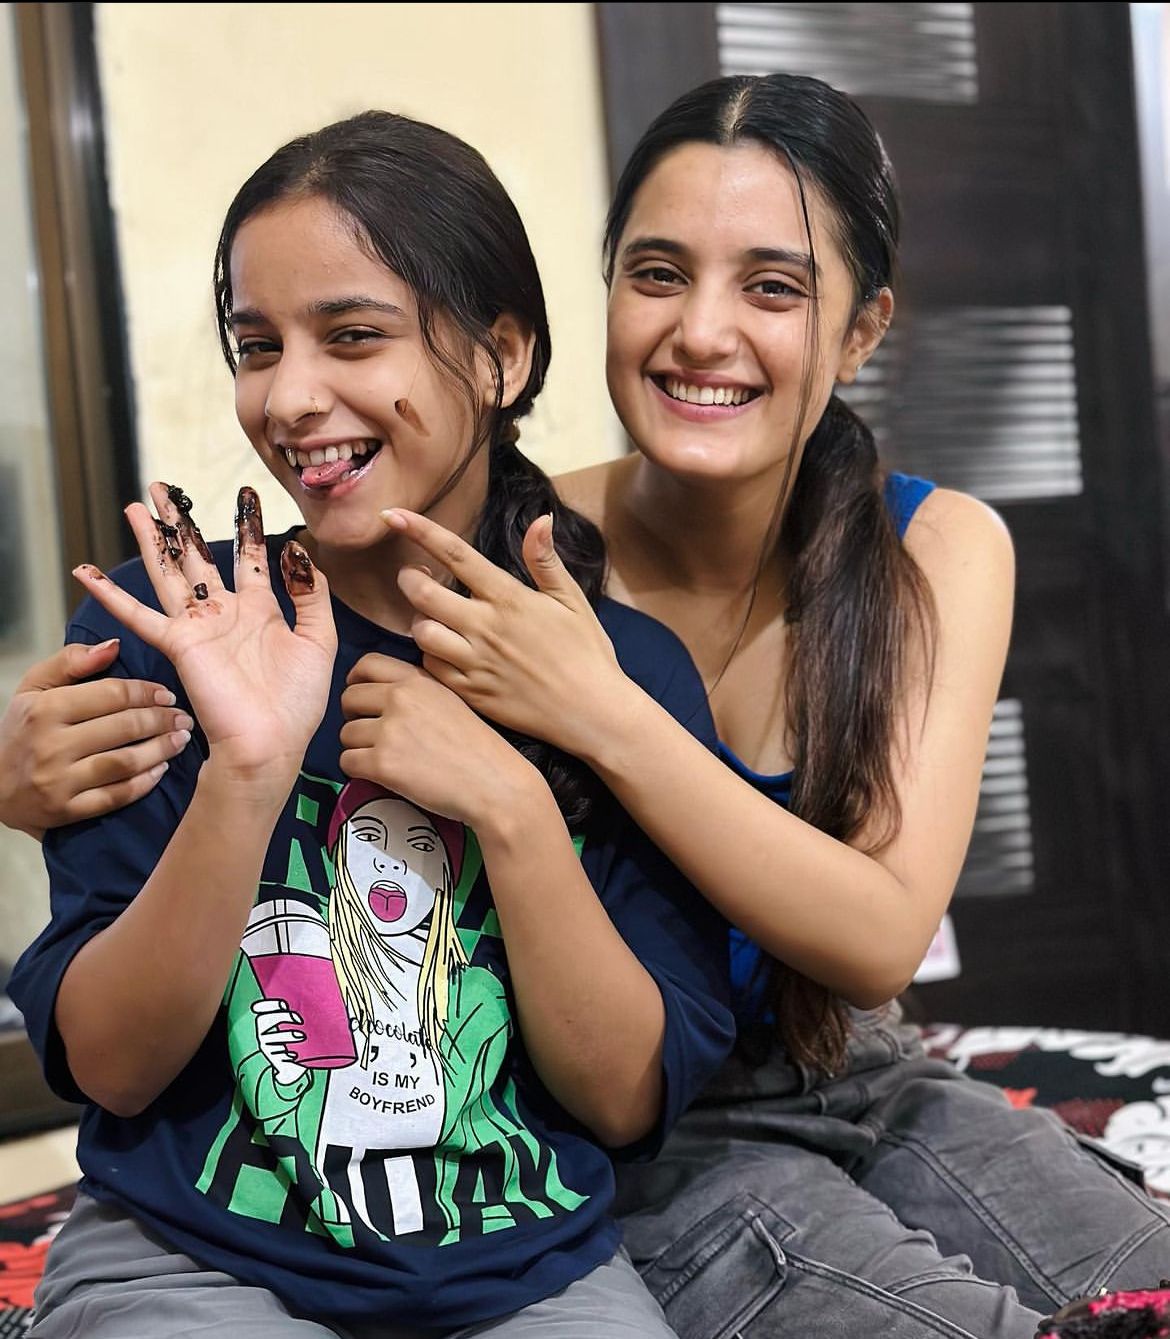 Ayushi Khurana from Star Bharat’s ‘Ajooni’ gave a surprise visit to her hometown to Reunite with her Family